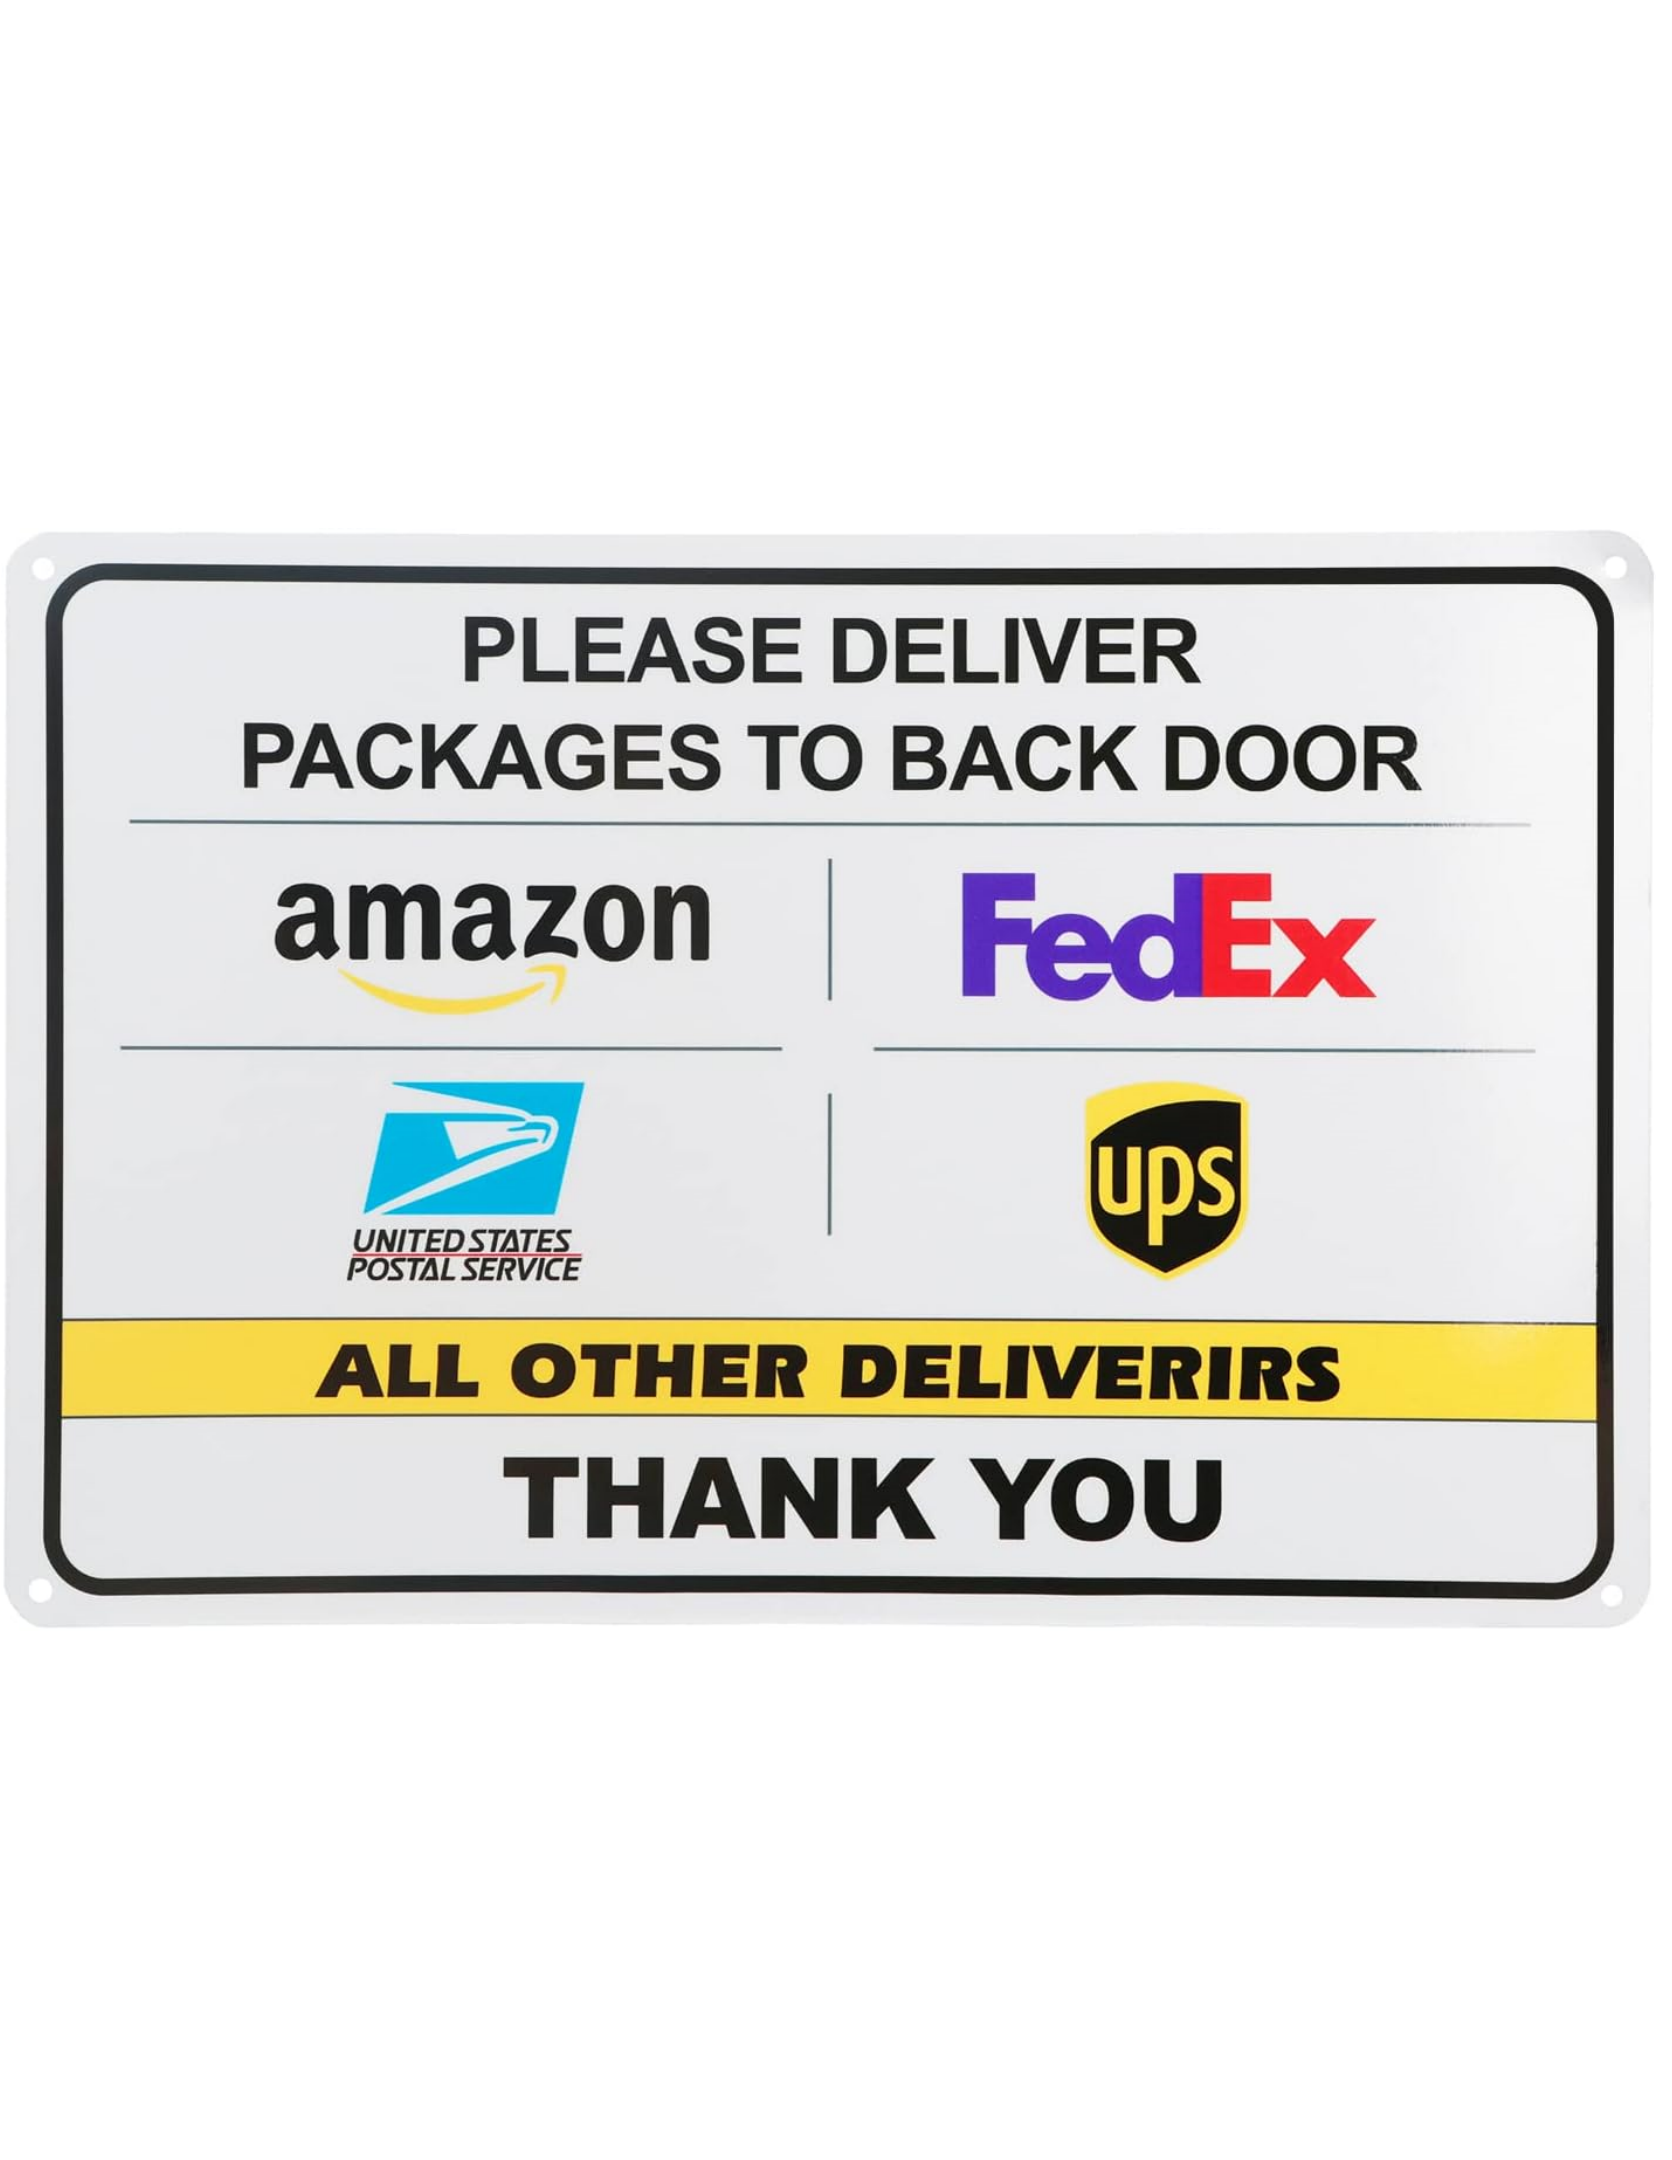 THTEN Package Delivery Sign“Please Deliver All Packages to Back Door sign”Delivery Instructions for Amazon UPS FedEx Metal Sign,12"x8" Rust Free Aluminum, Easy Mounting,Indoor/Outdoor Use